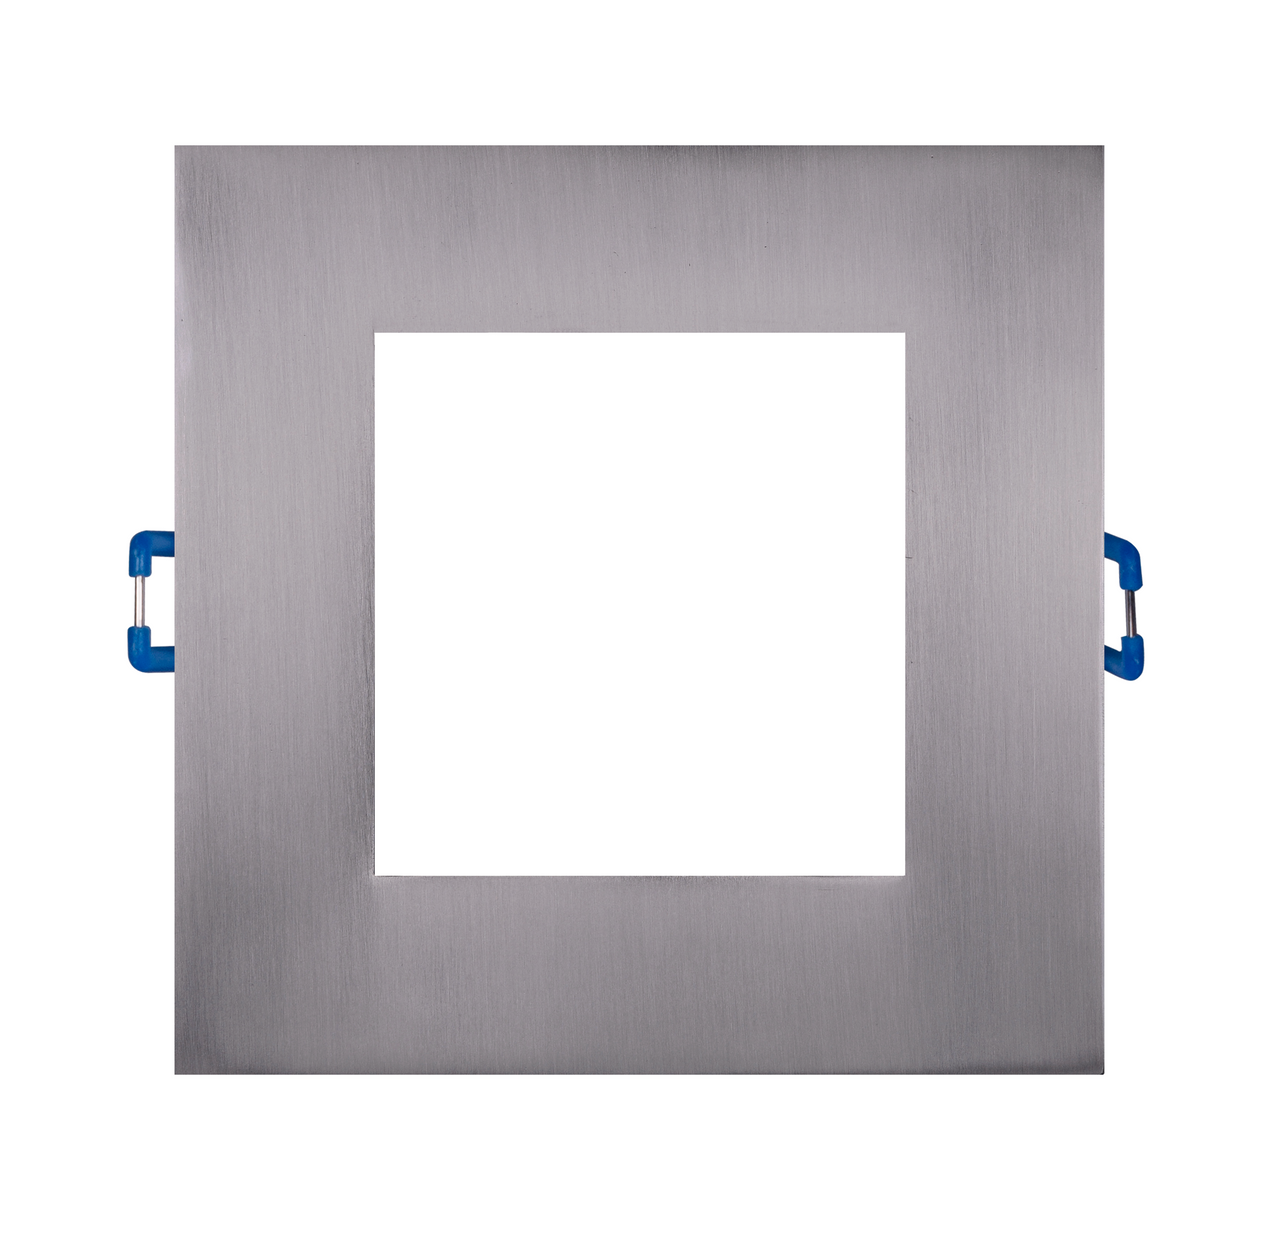 NICOR DLE621204KSQNK DLE6 Series 6 in. Square Nickel Flat Panel LED Downlight in 4000K